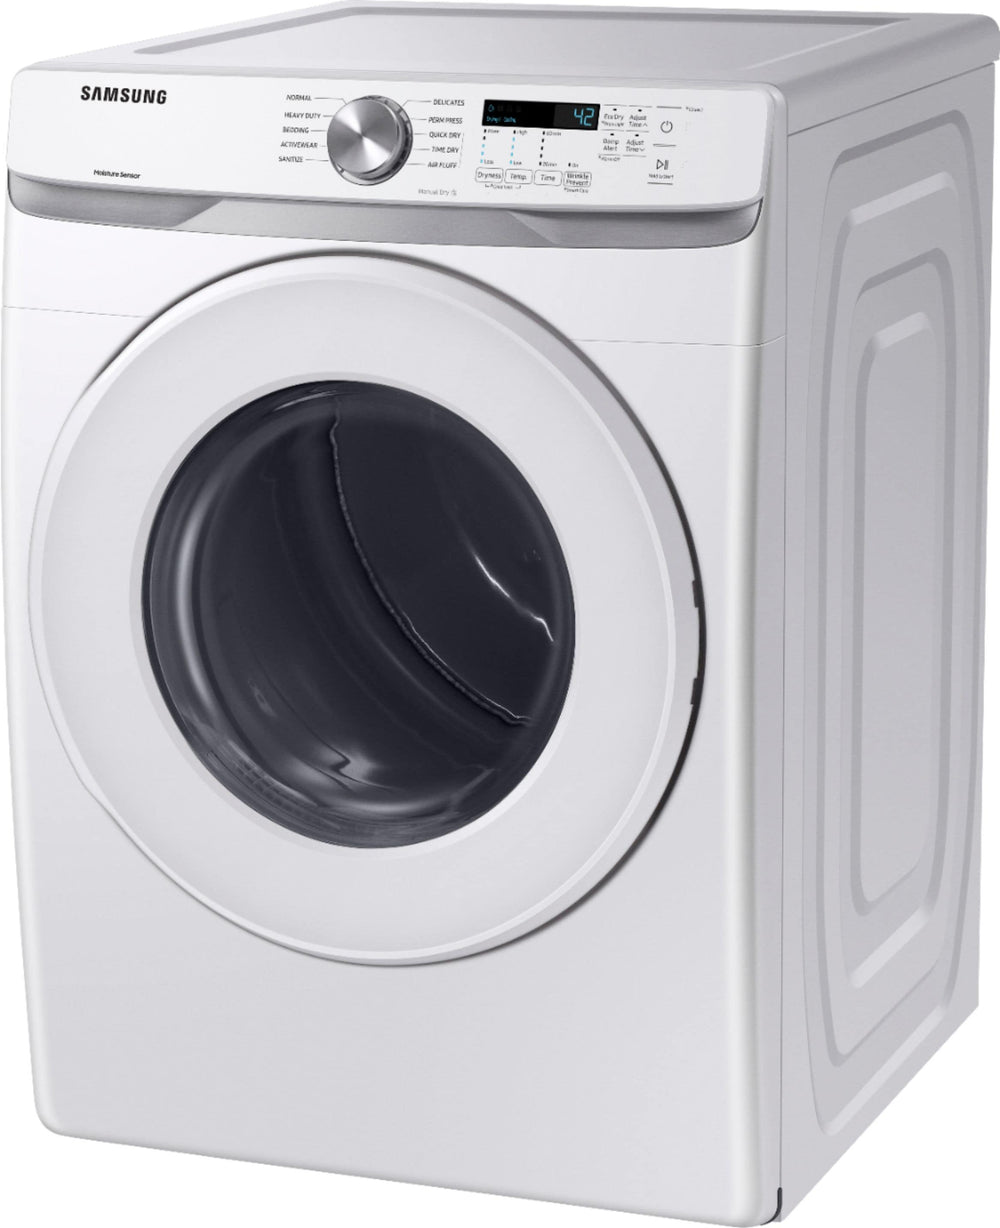 Samsung - 7.5 Cu. Ft. Stackable Gas Dryer with Sensor Dry - White_1